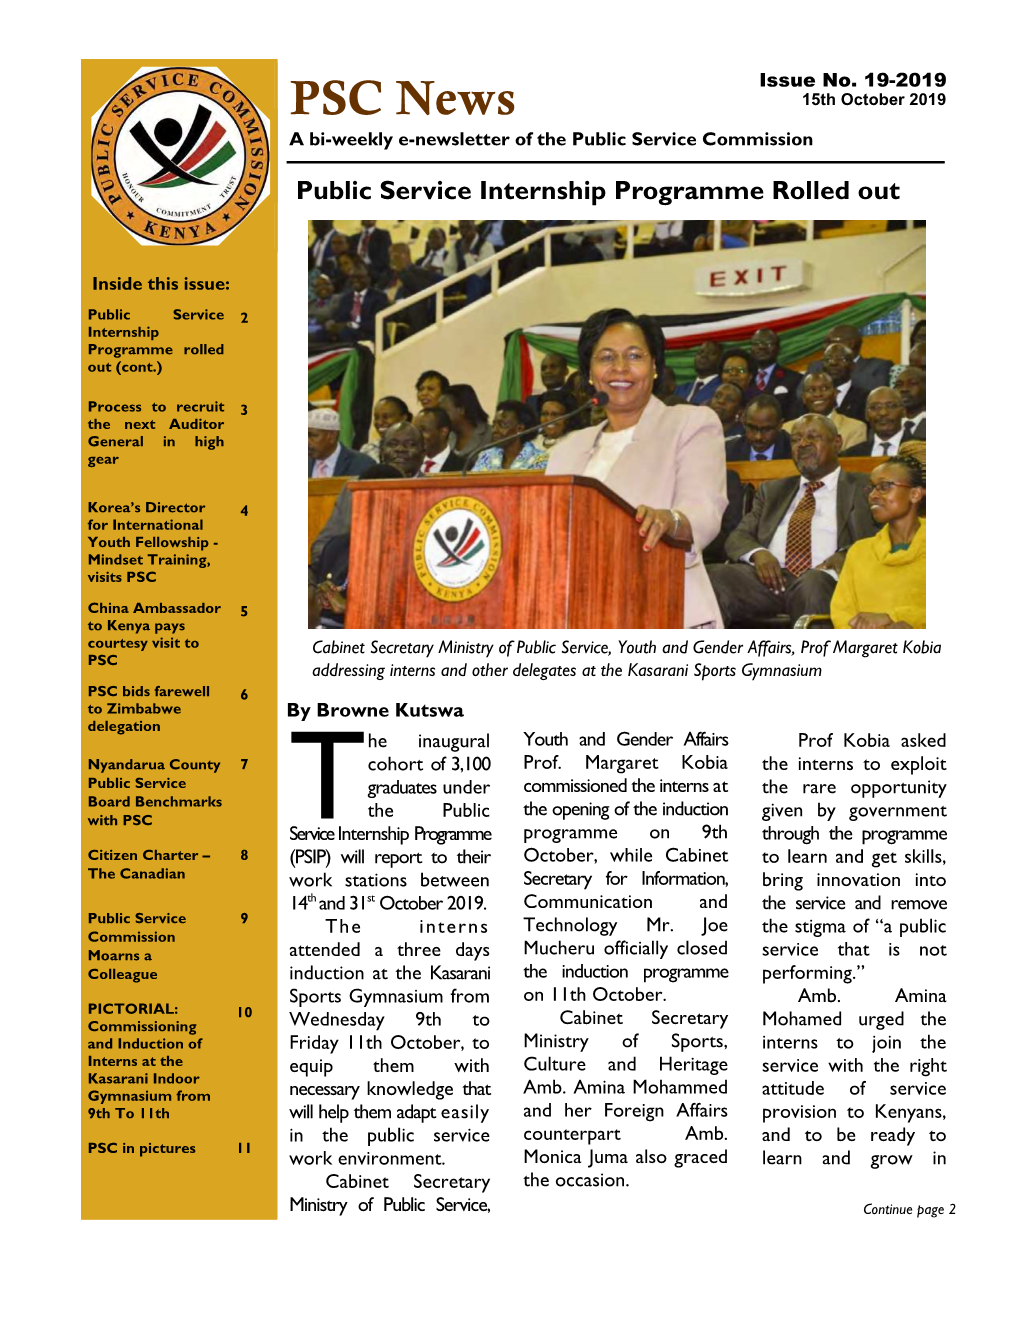 PSC News 15Th October 2019 a Bi-Weekly E-Newsletter of the Public Service Commission